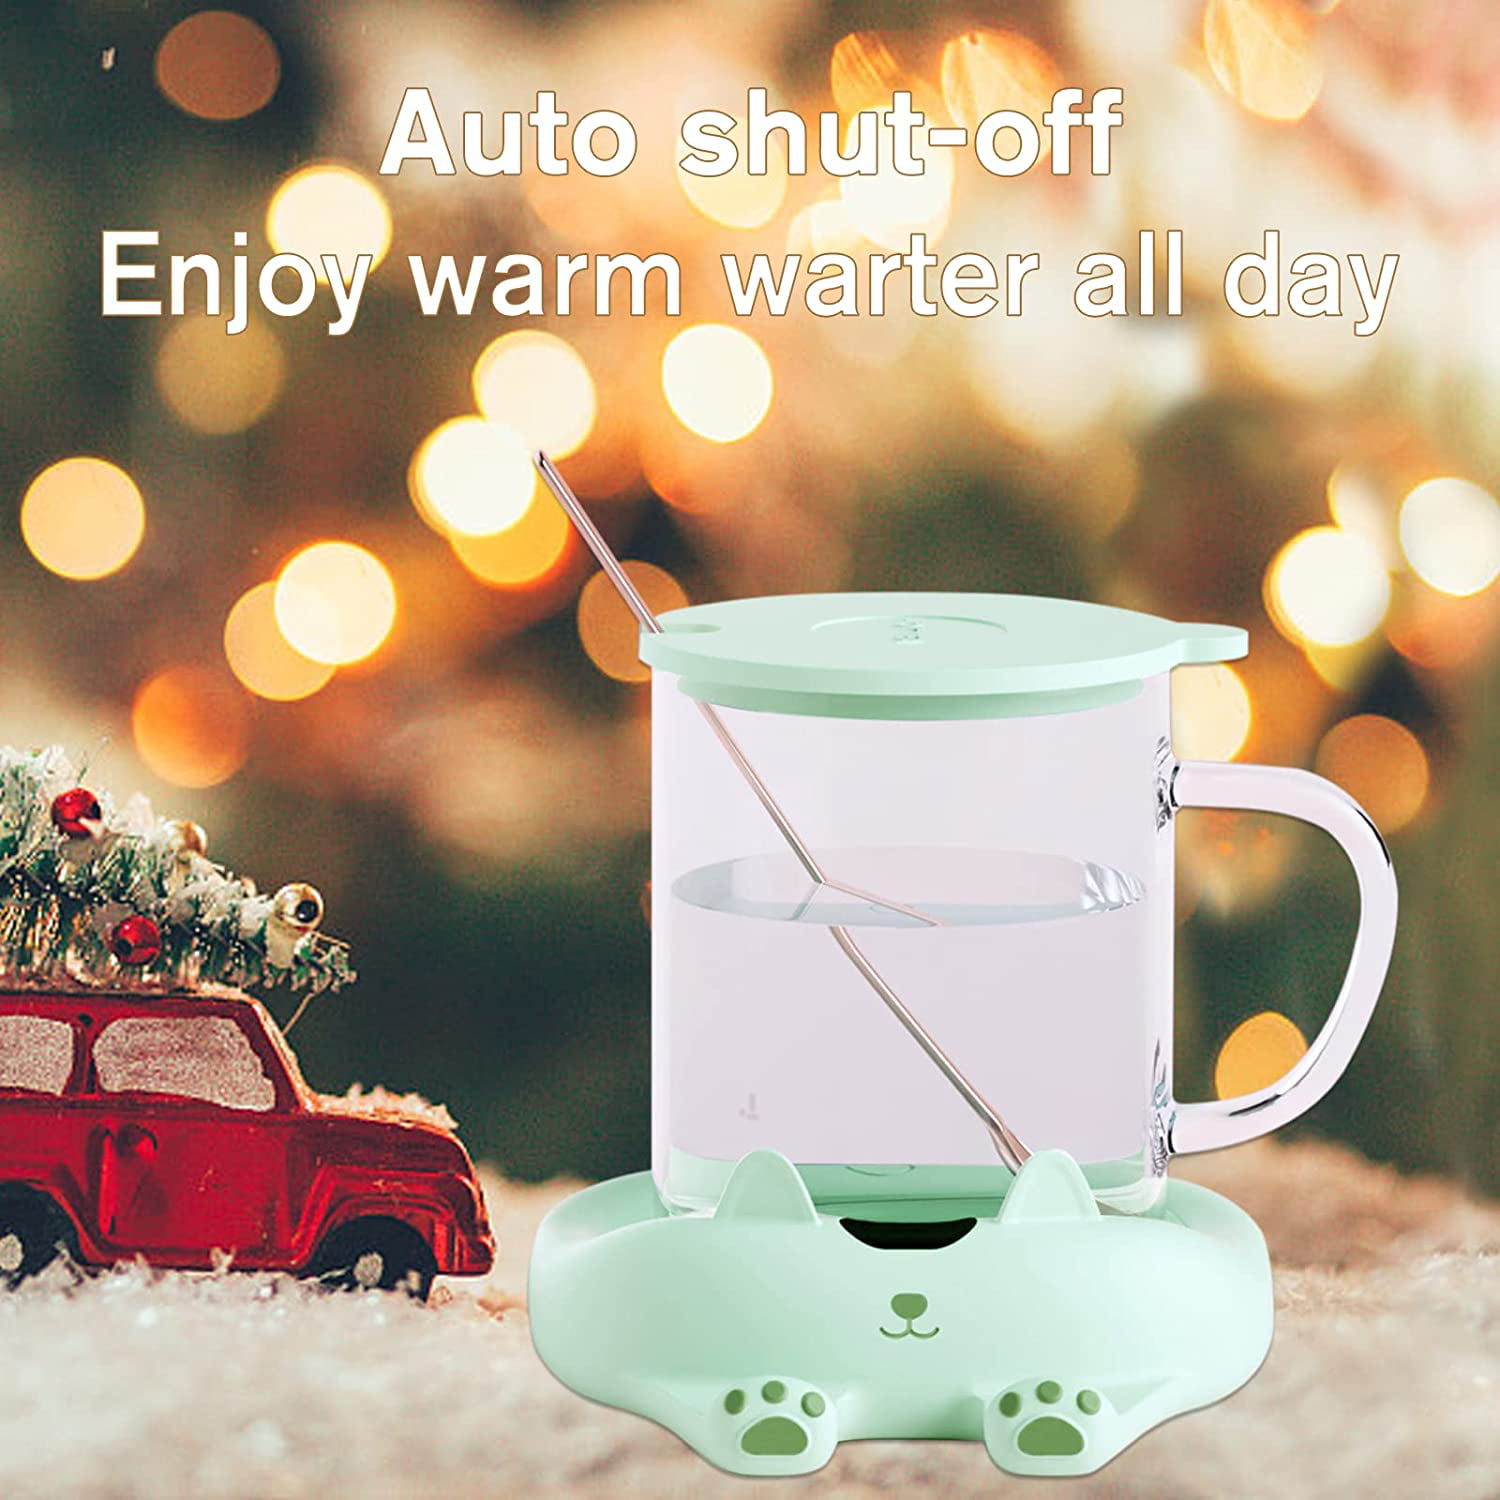 Cocobela Waterproof Smart Coffee Mug Warmer, Coffee Cup Warmer for Desk Auto Shut Off, Electric Beverage Warmer Plate with Two Temperature Settings